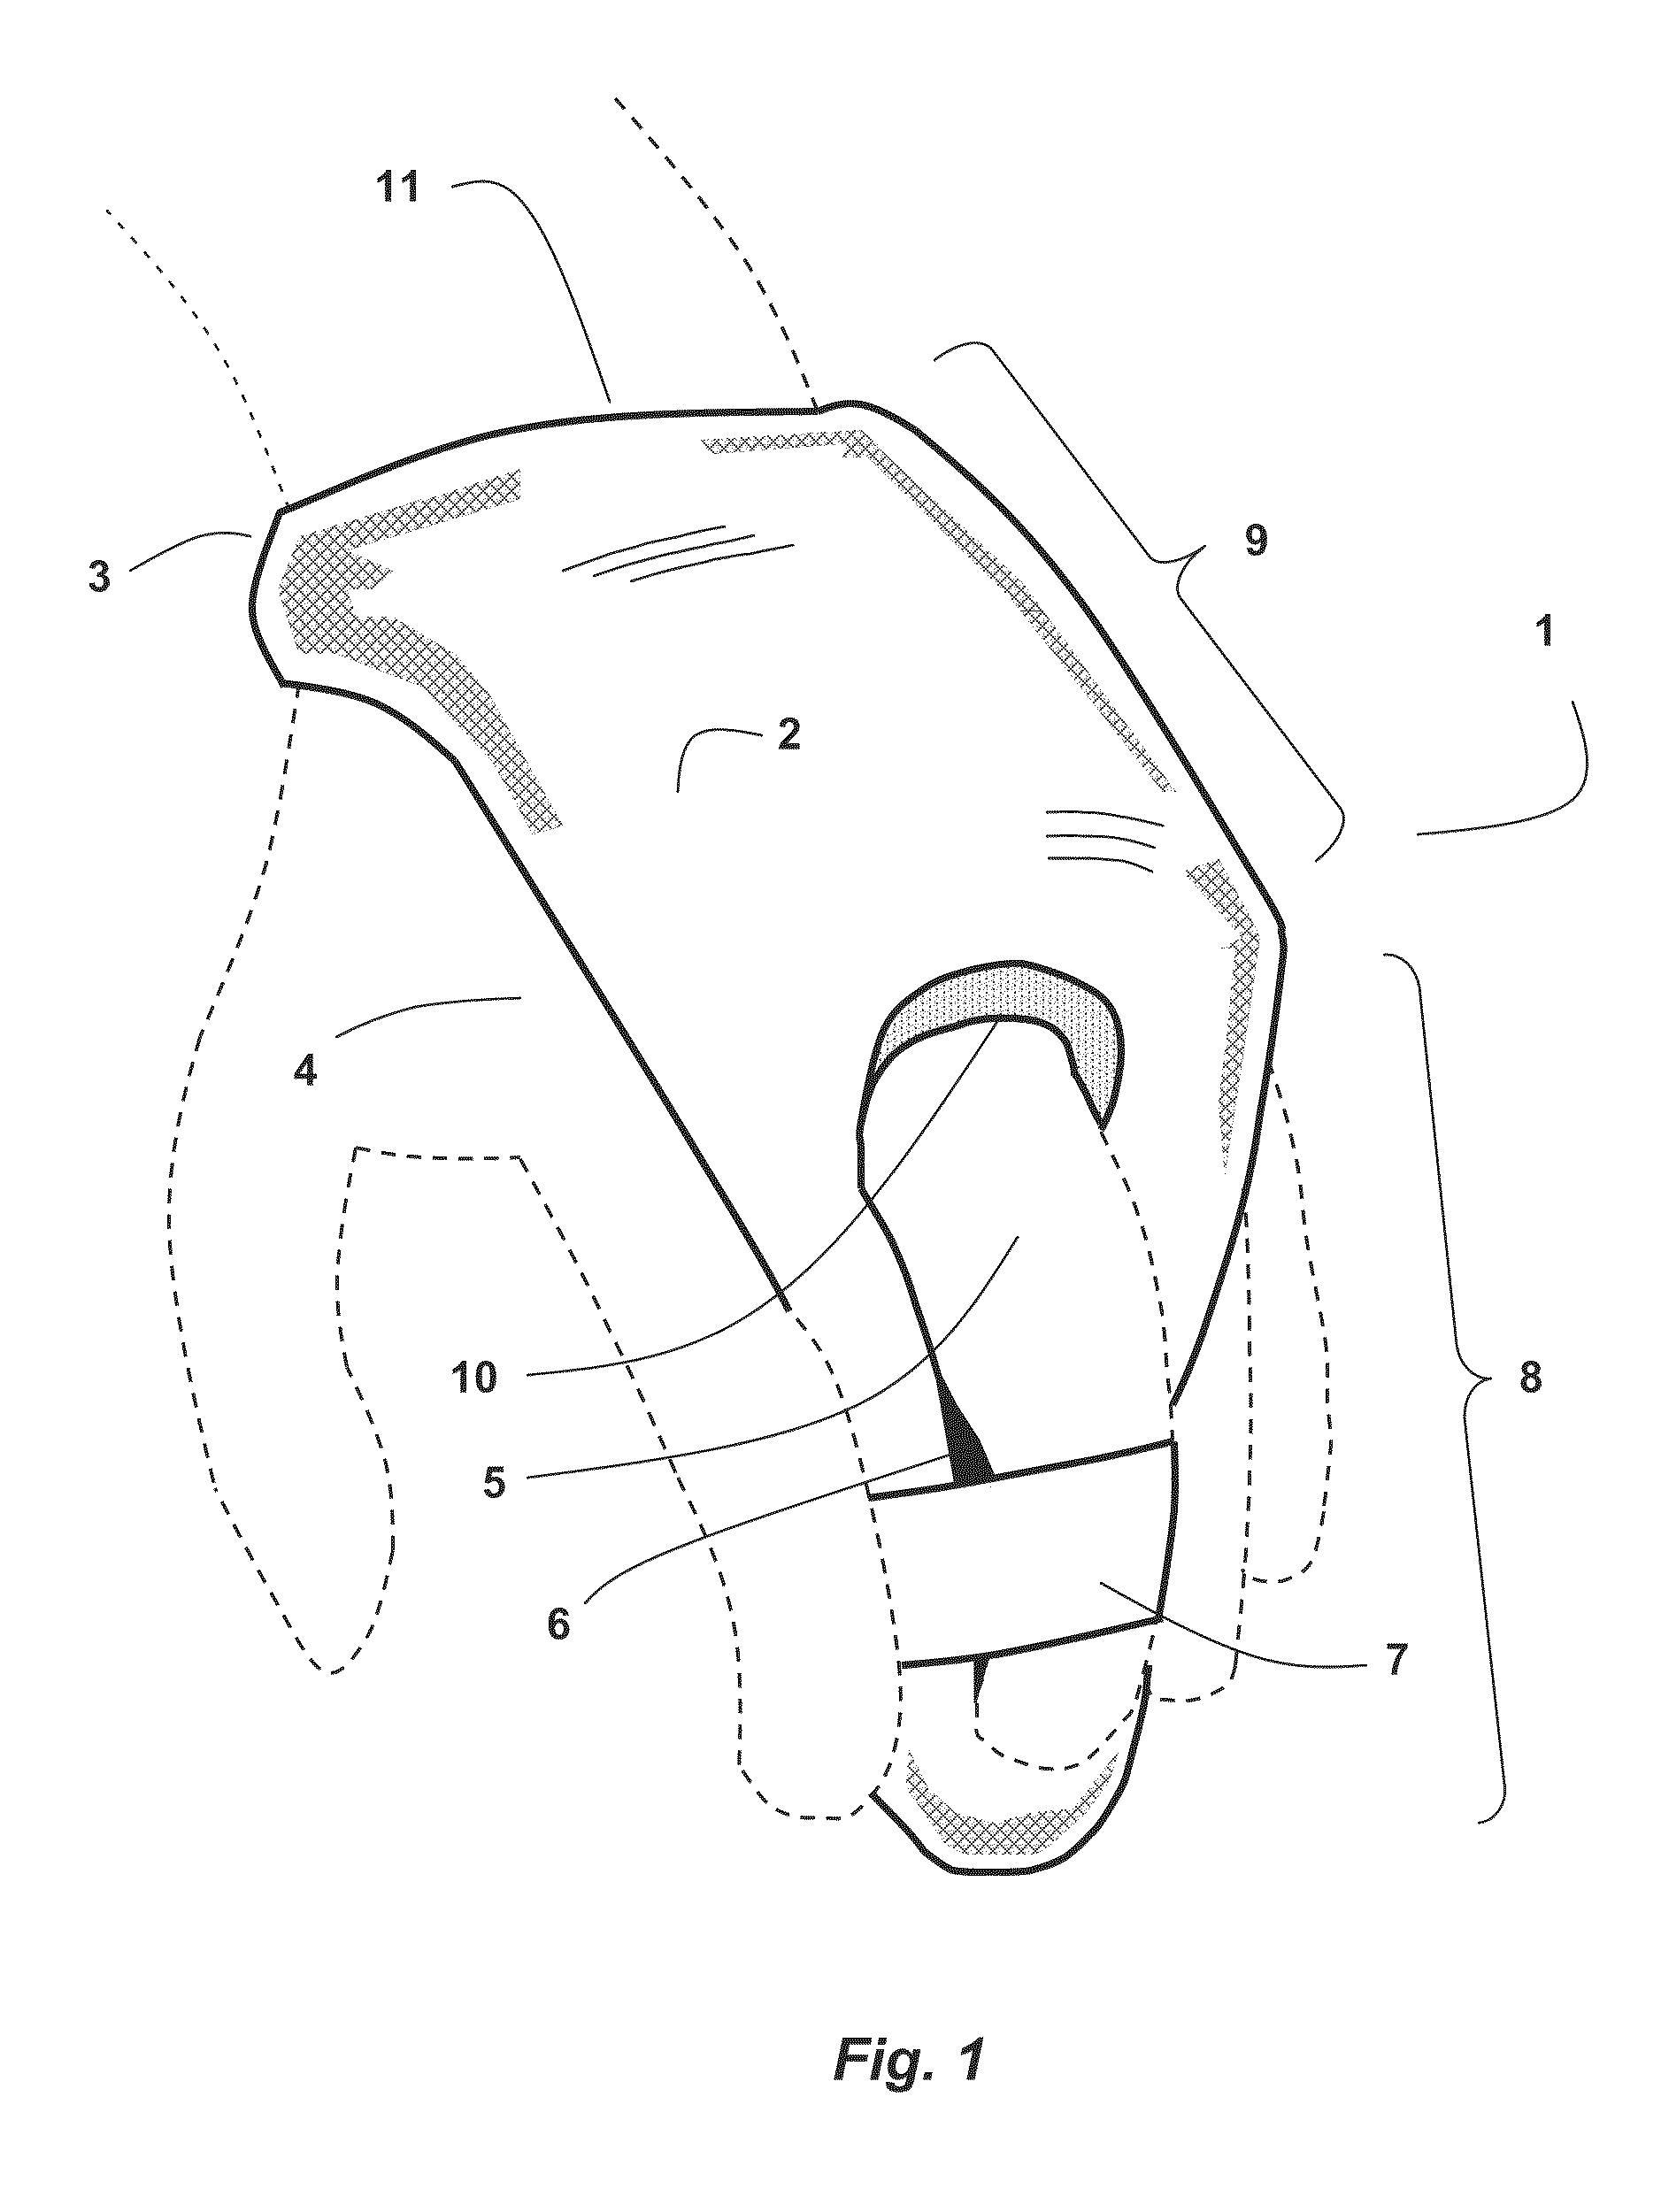 Finger Splint Device for Preventing Contractures and the Like and Method of Using Same